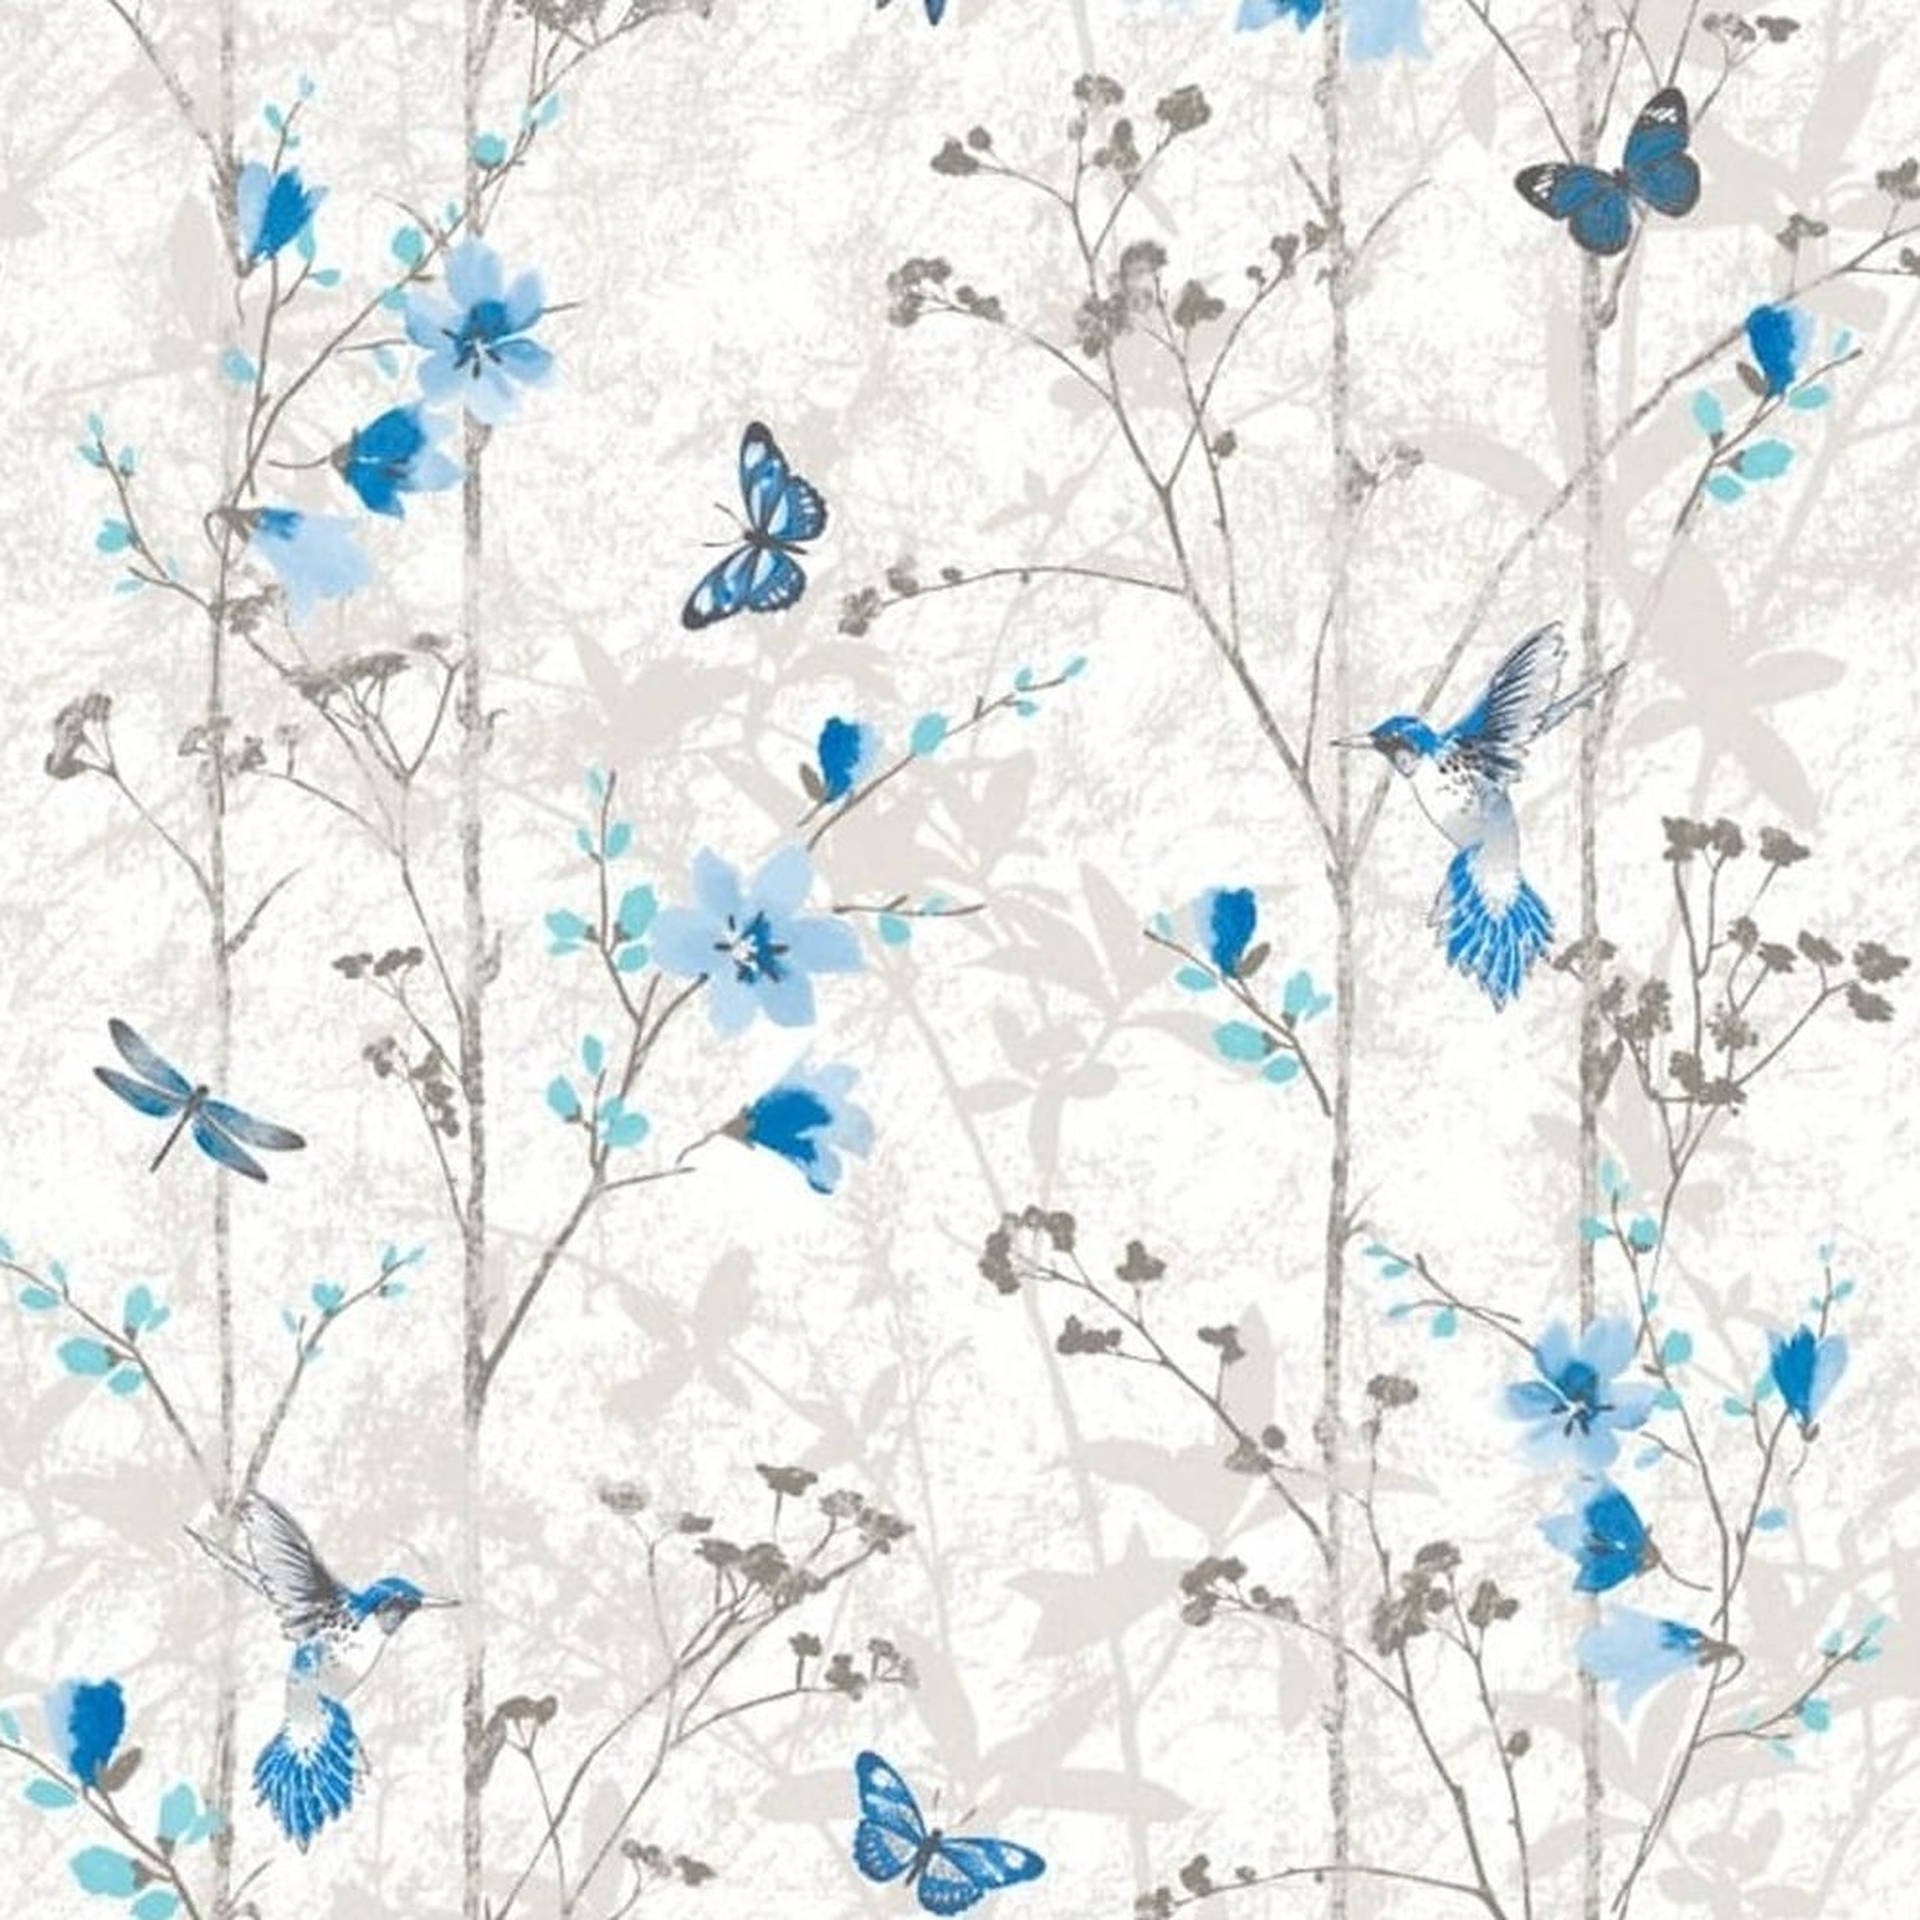 Aesthetic Flower With Blue Butterfly Wallpaper